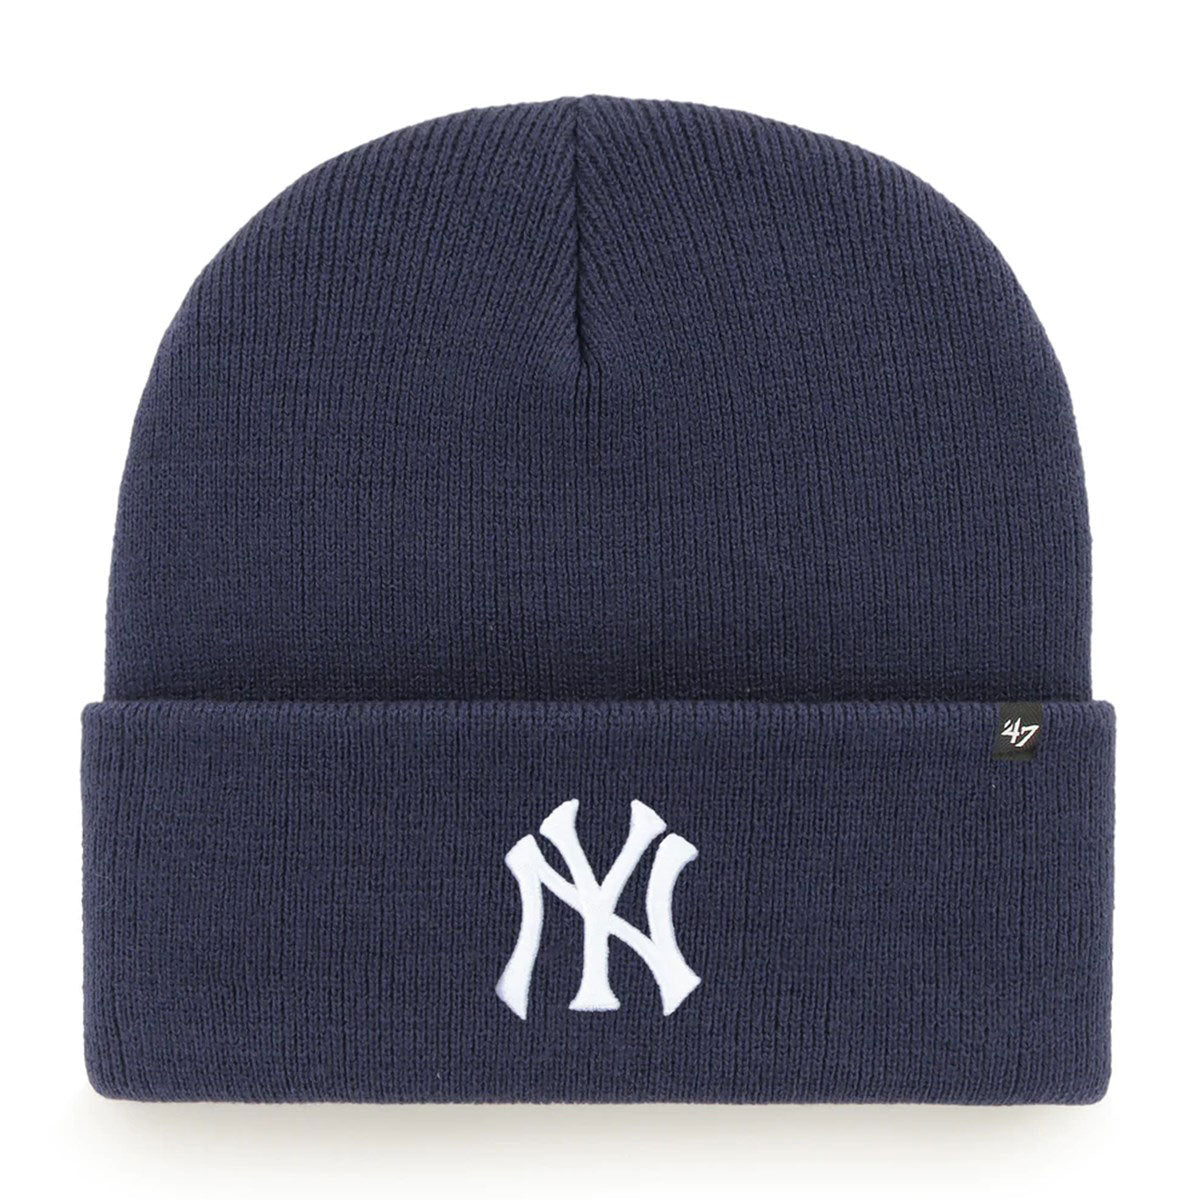 ’47 BRAND Yankees Raised '47 Cuff Knit 【RKN17ACE】